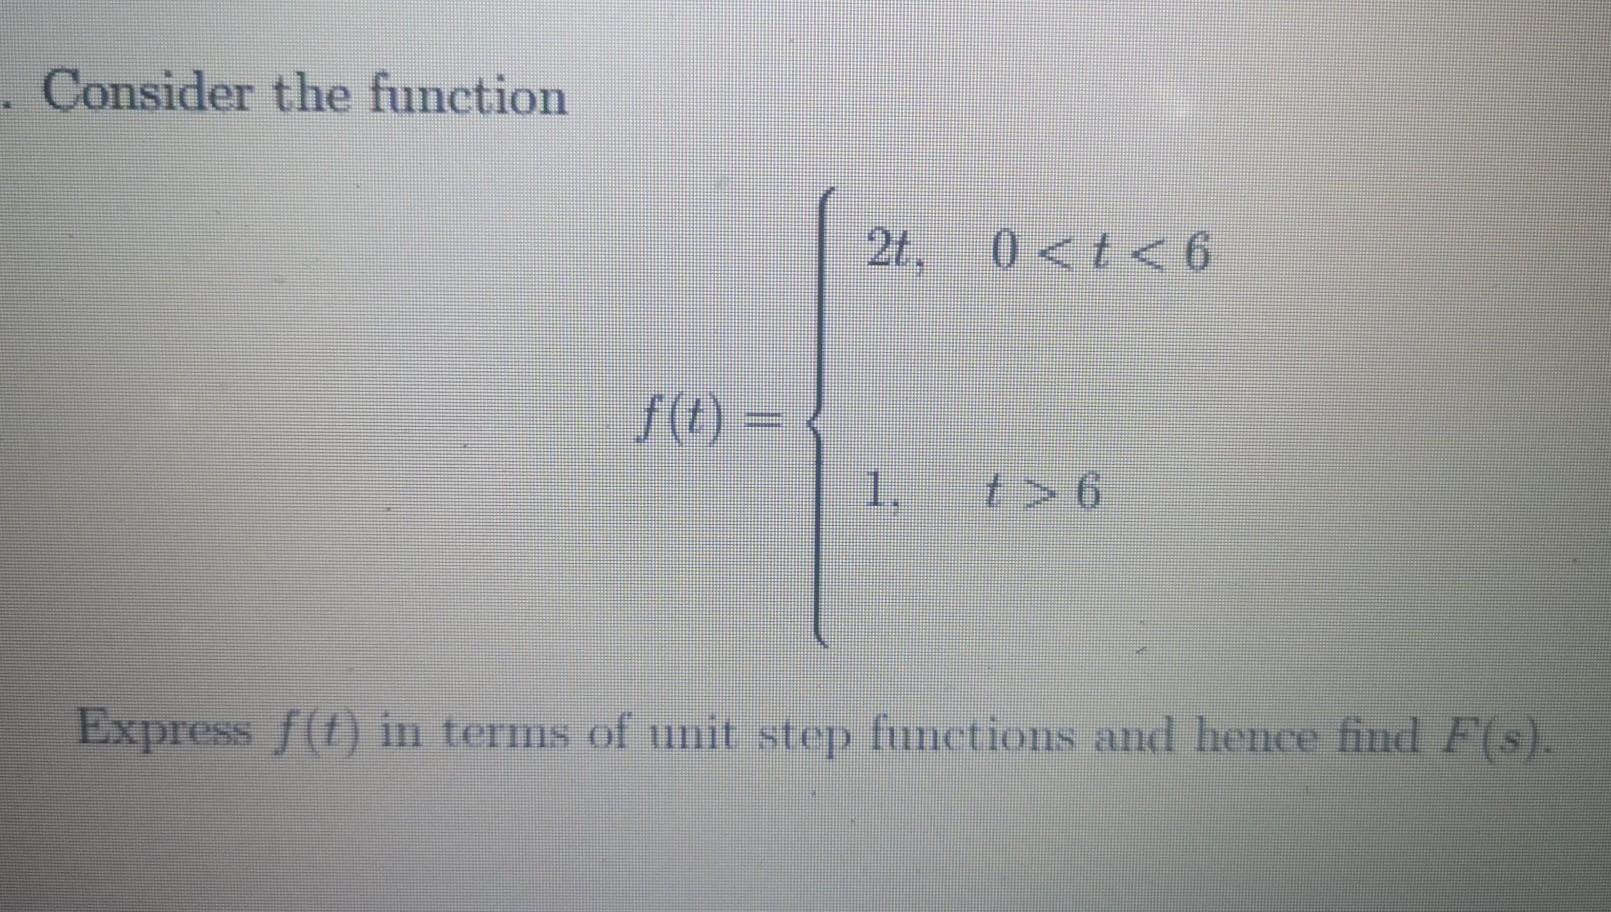 Consider The Function 2t 0 T 6 1 Y 6 Express 1 In Terms Of Unit Step Functions And Hence Find F S 1